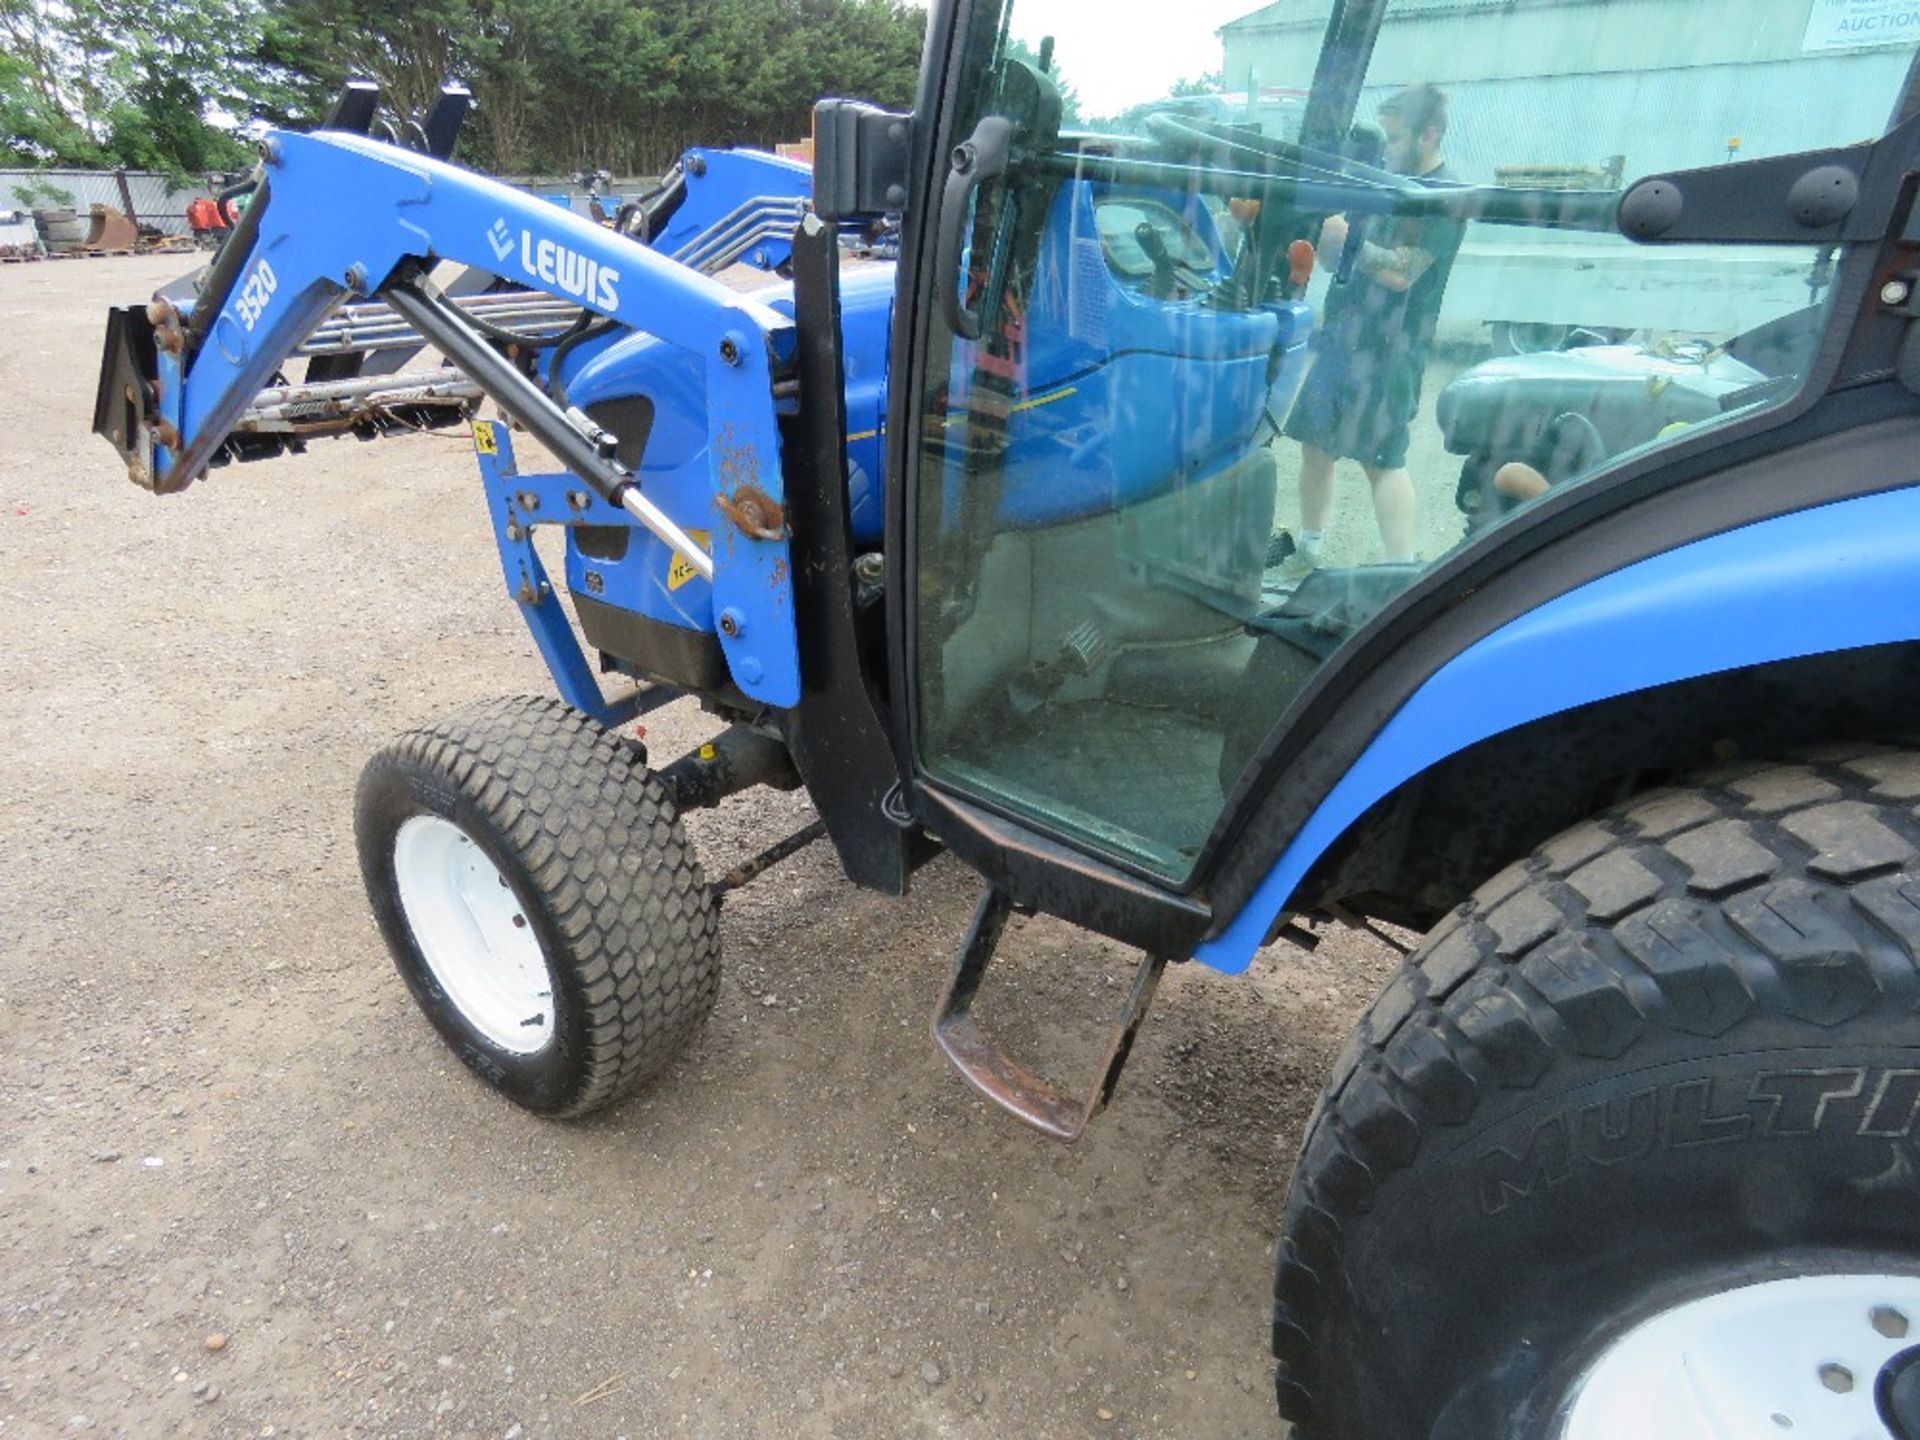 NEW HOLLAND TC45A 4WD COMPACT TRACTOR WITH LEWIS 3520 FRONT LOADER AND PALLET FORKS. REG:SP09 EWG ( - Image 6 of 13